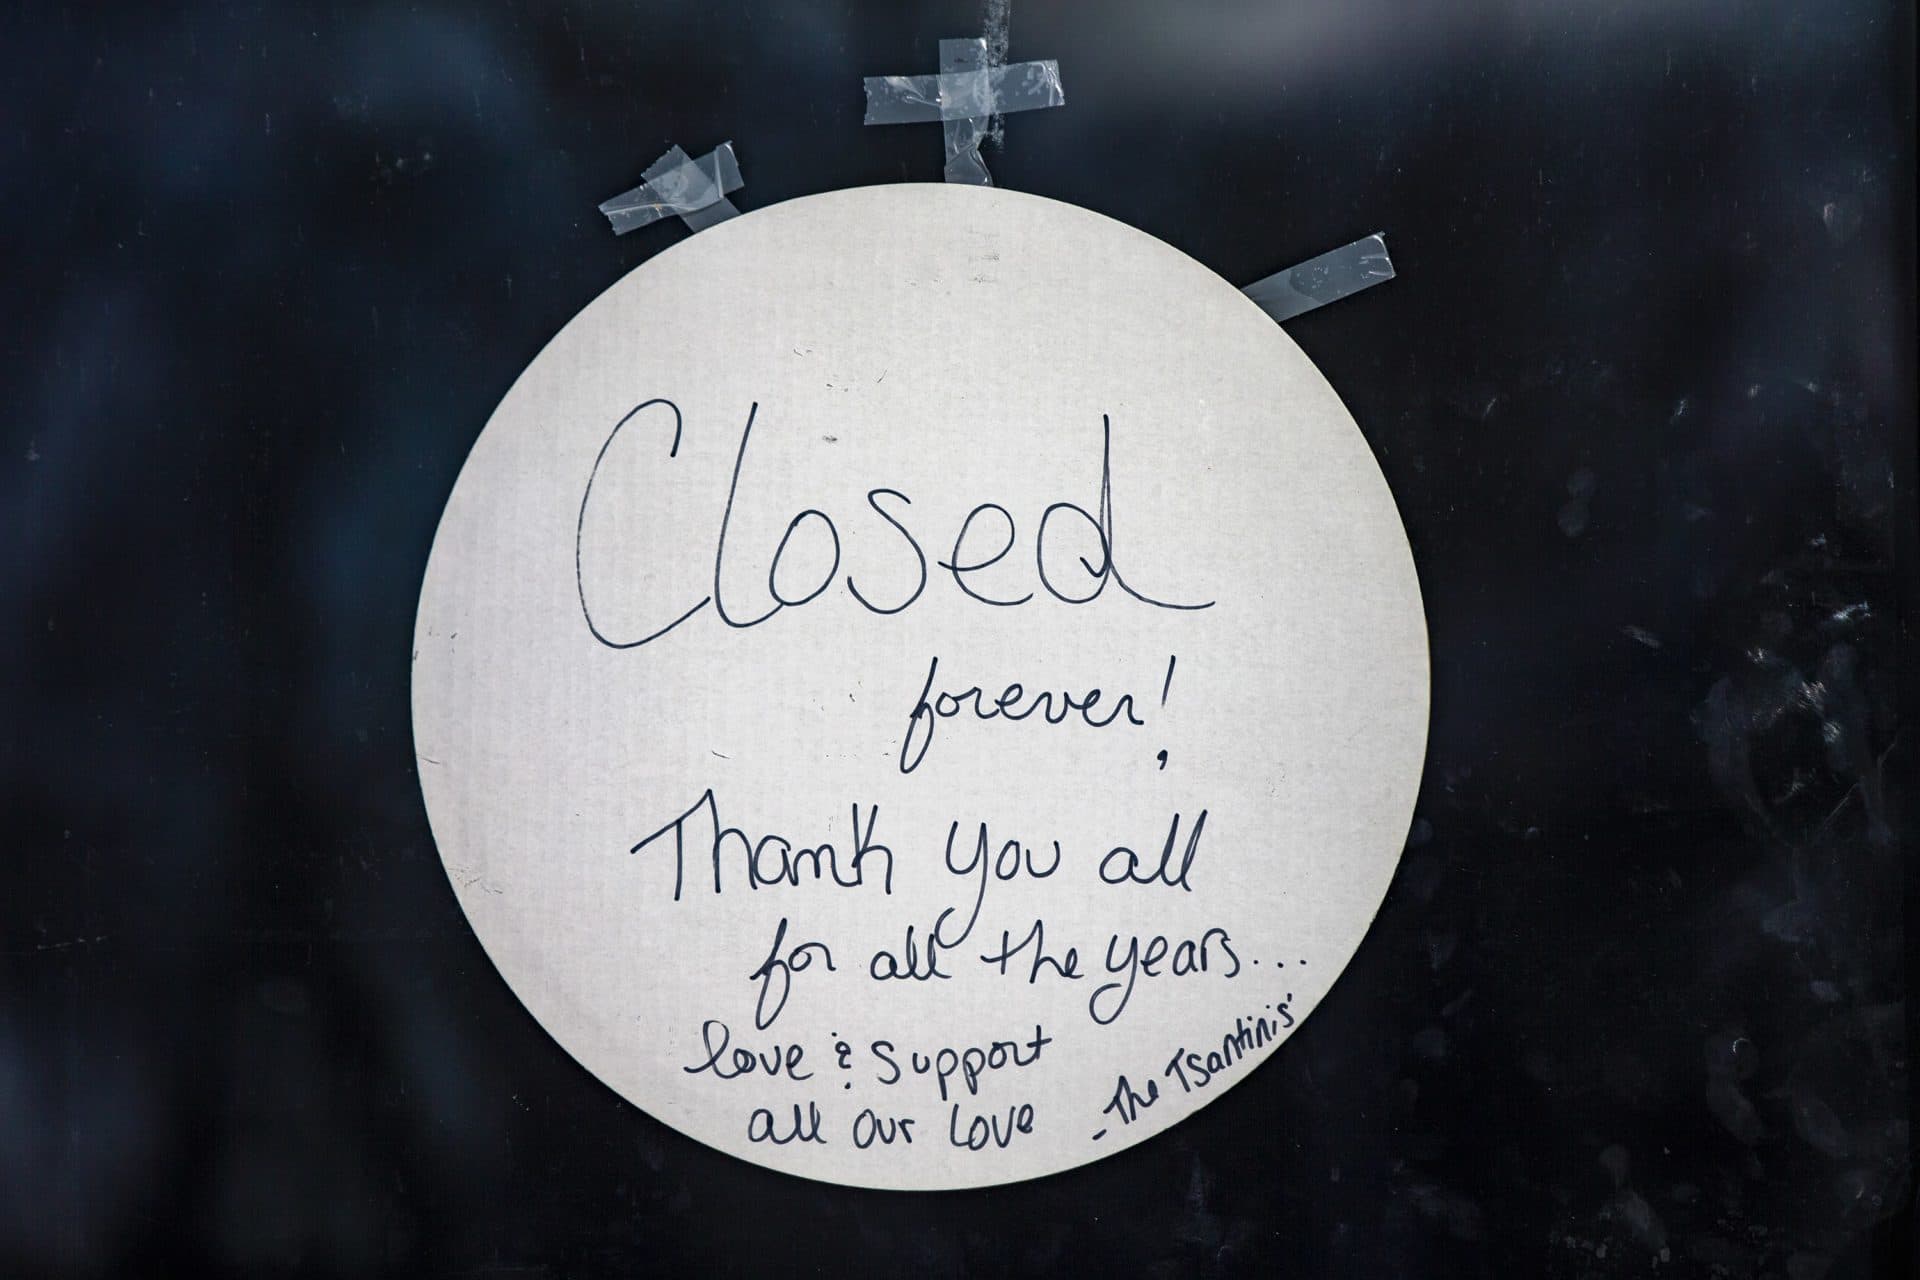 A “closed” sign on the door of Athens Pizza in Brimfield thanking the community for the many years of support. (Jesse Costa/WBUR)